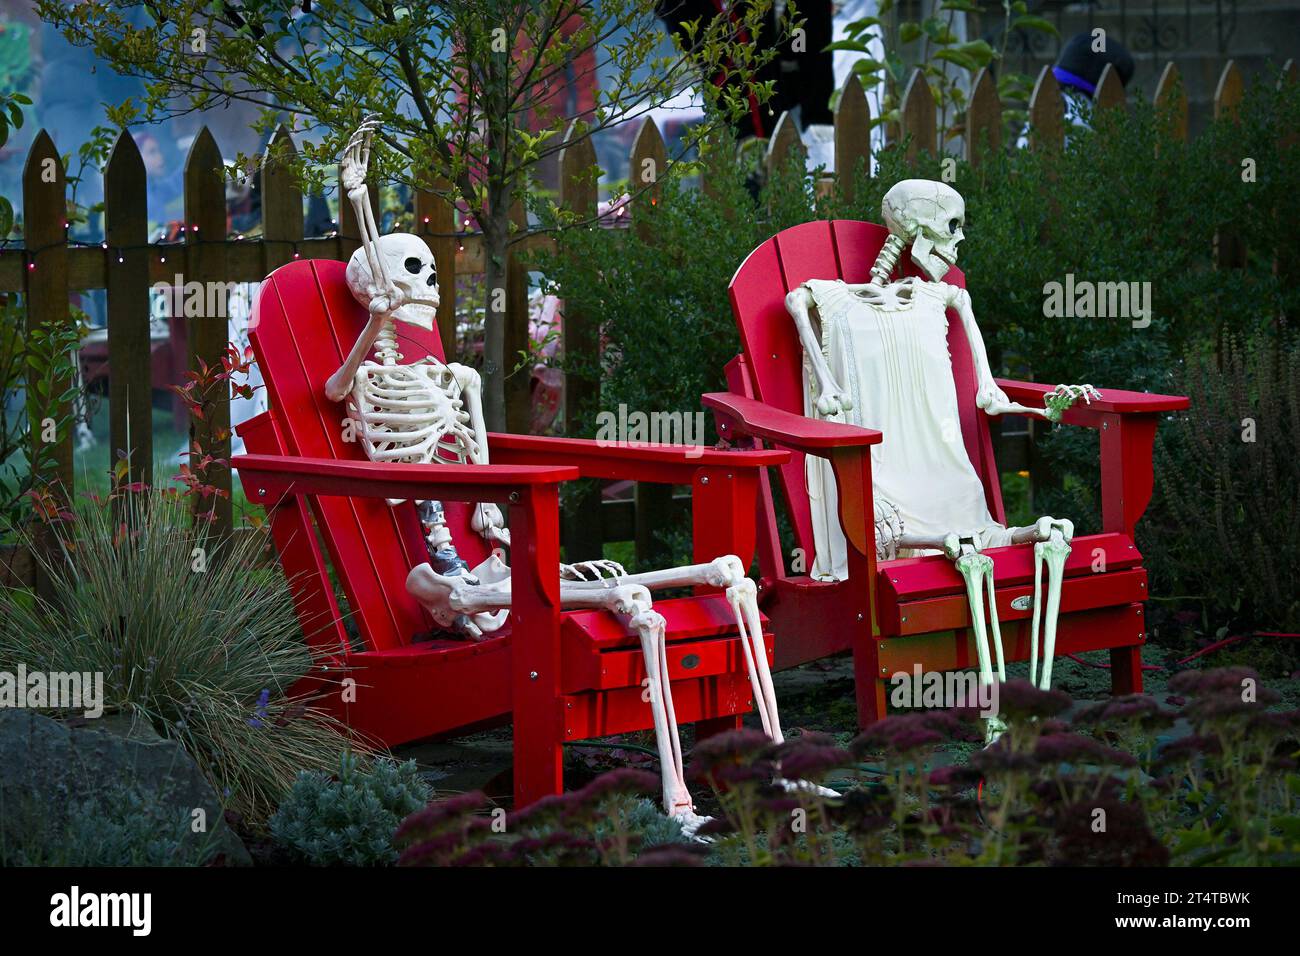 Halloween, skeletons lounging in red Adirondack chairs Stock Photo